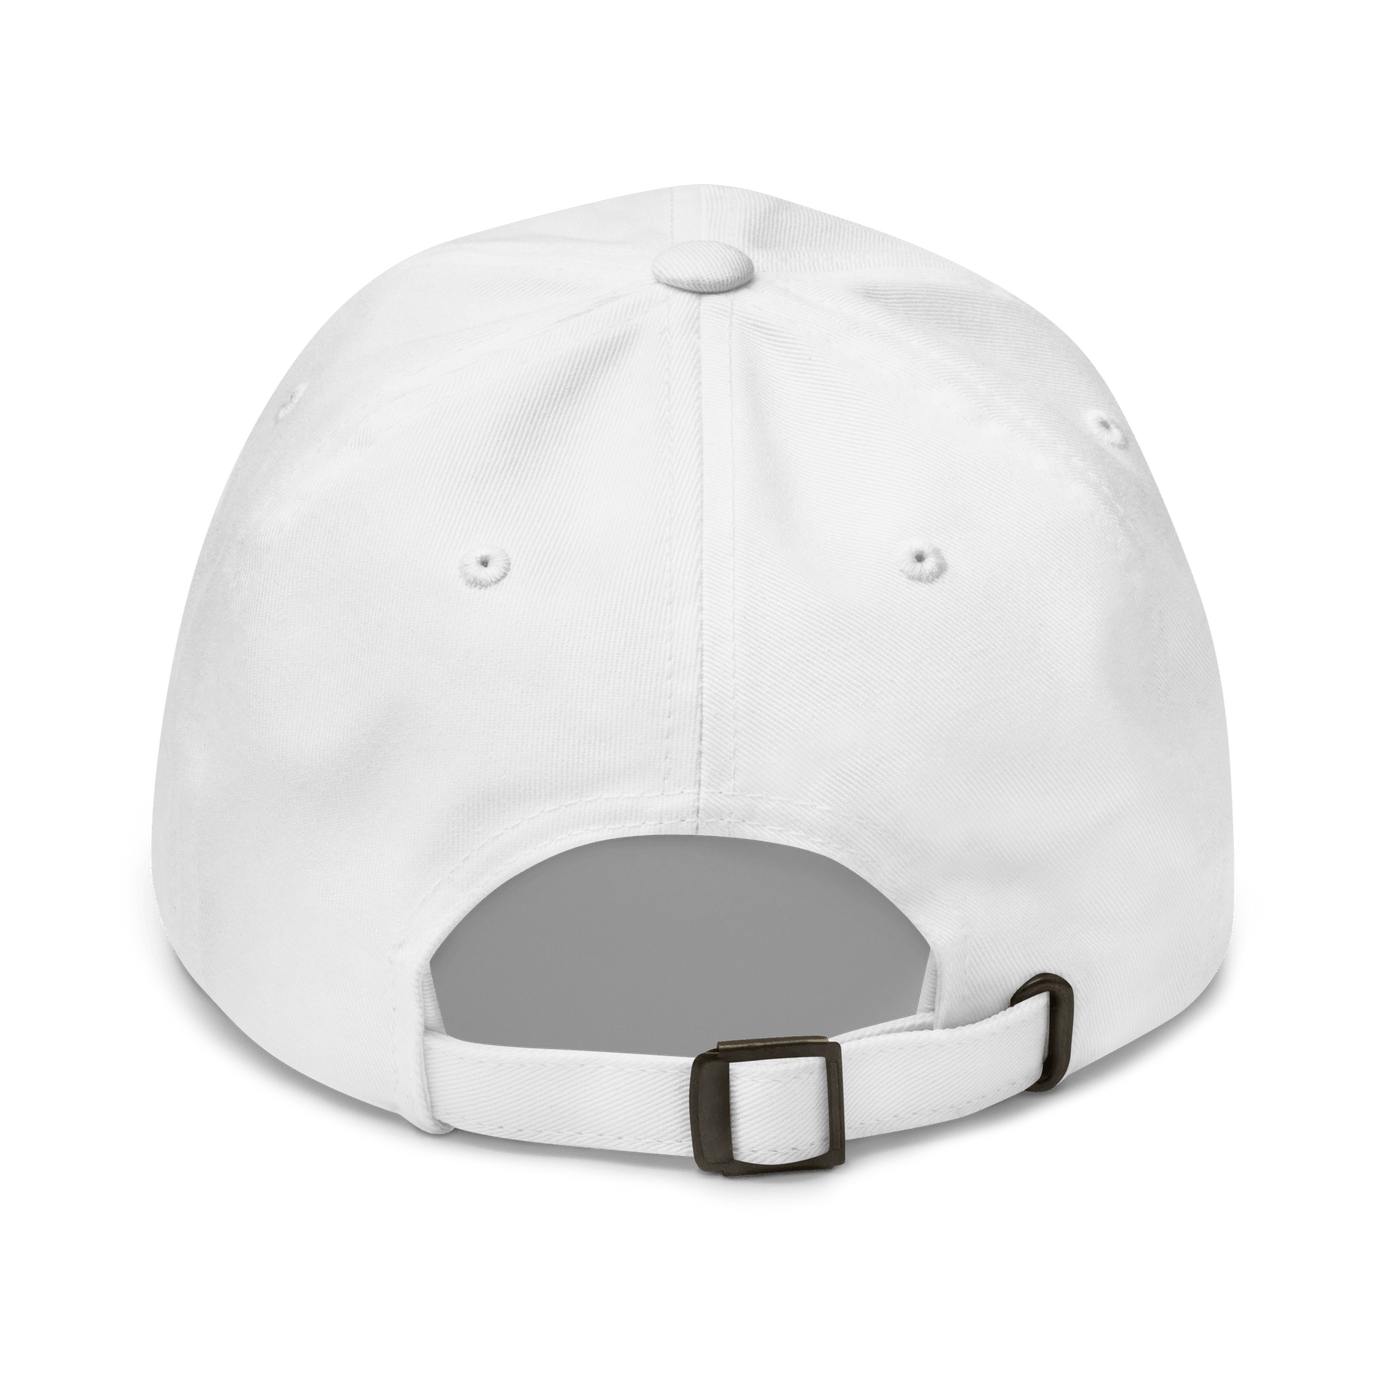 JACS Fries Dad hat - Light Blue - - Just Another Cap Store